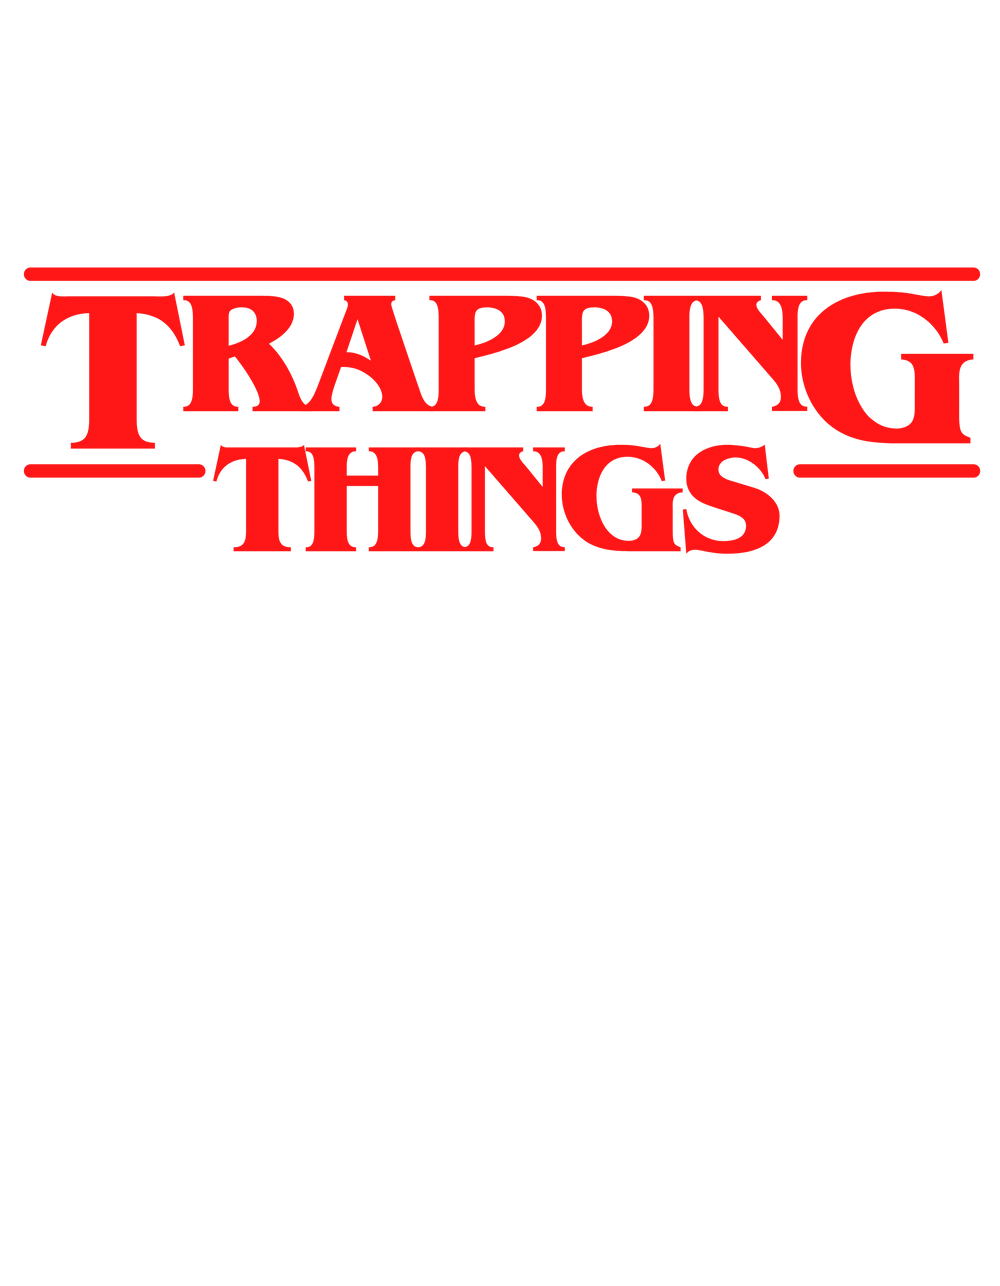 TRAPPING THINGS